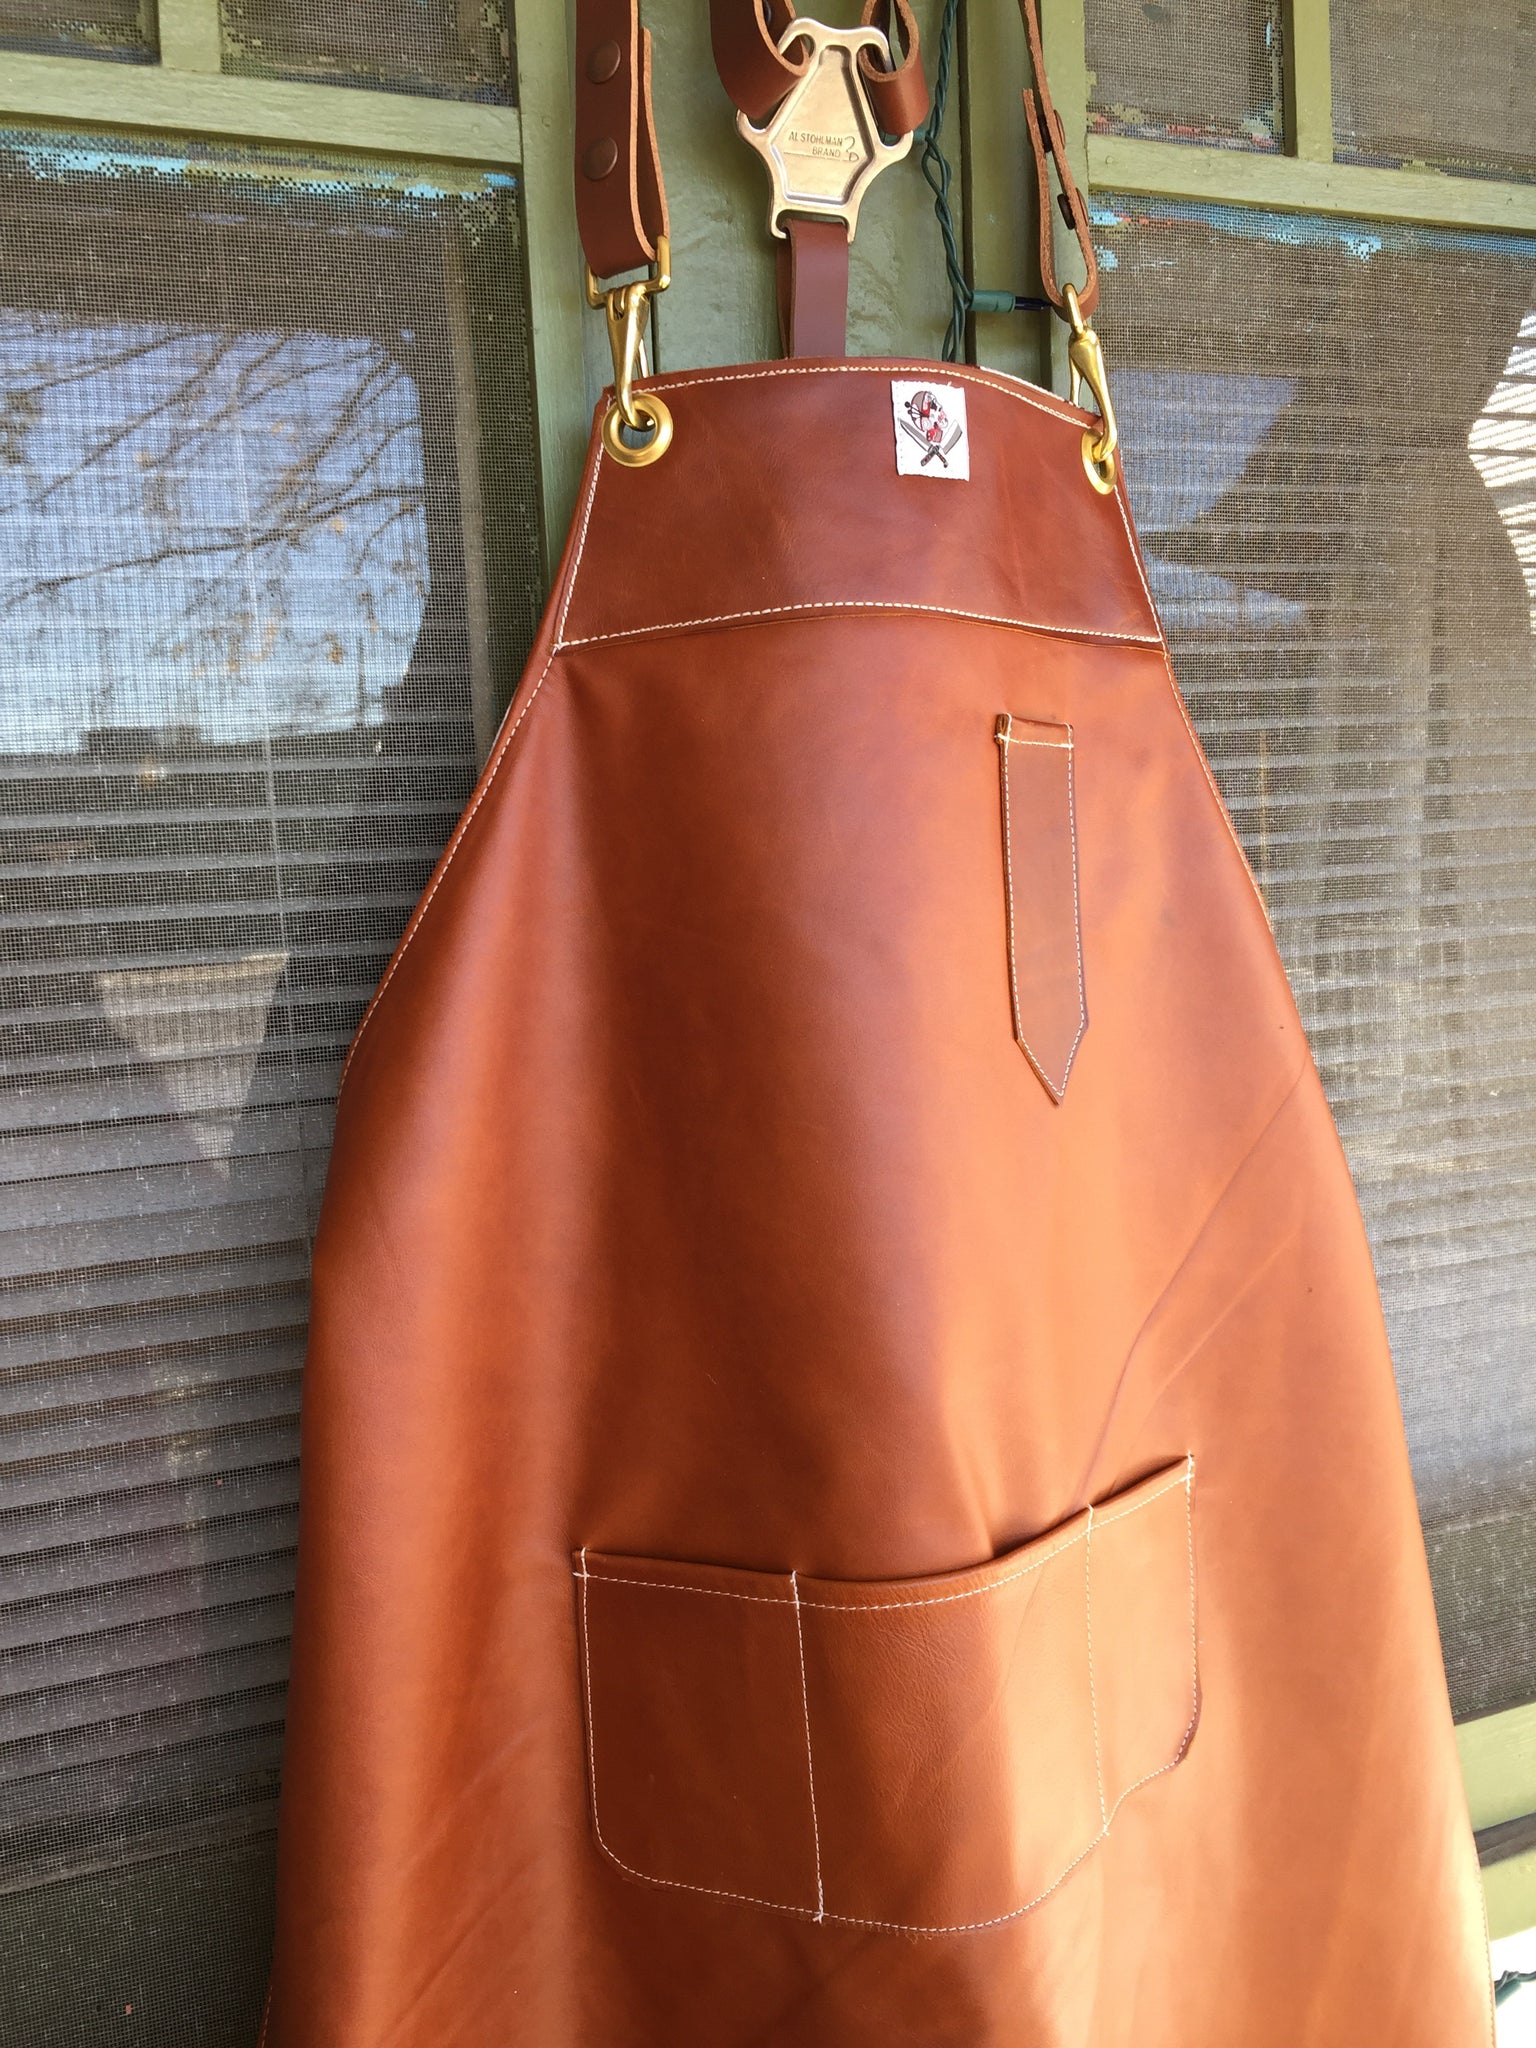 Texas A&M full cognac or brown leather reversible apron